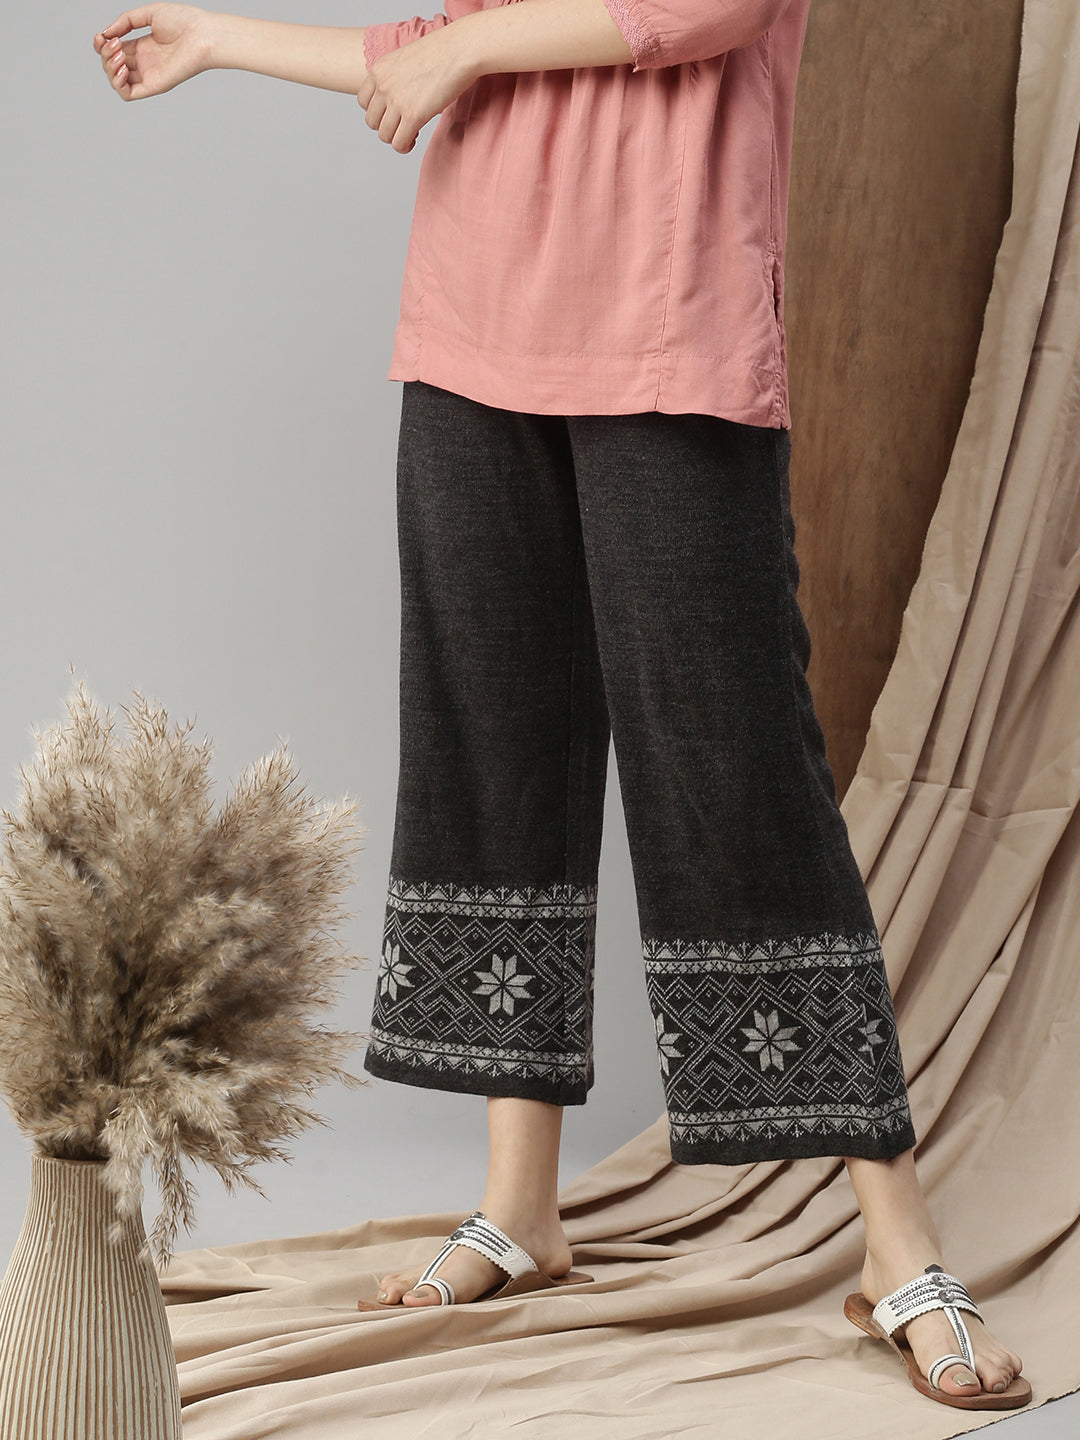 Lovely Classy Palazzo Attire For Dinner 10+ Cozy Winter Outfits To Copy  ASAP | Palazzo Pants Outfit | Palazzo And Tops, Palazzo Attire, Palazzo  Cotton